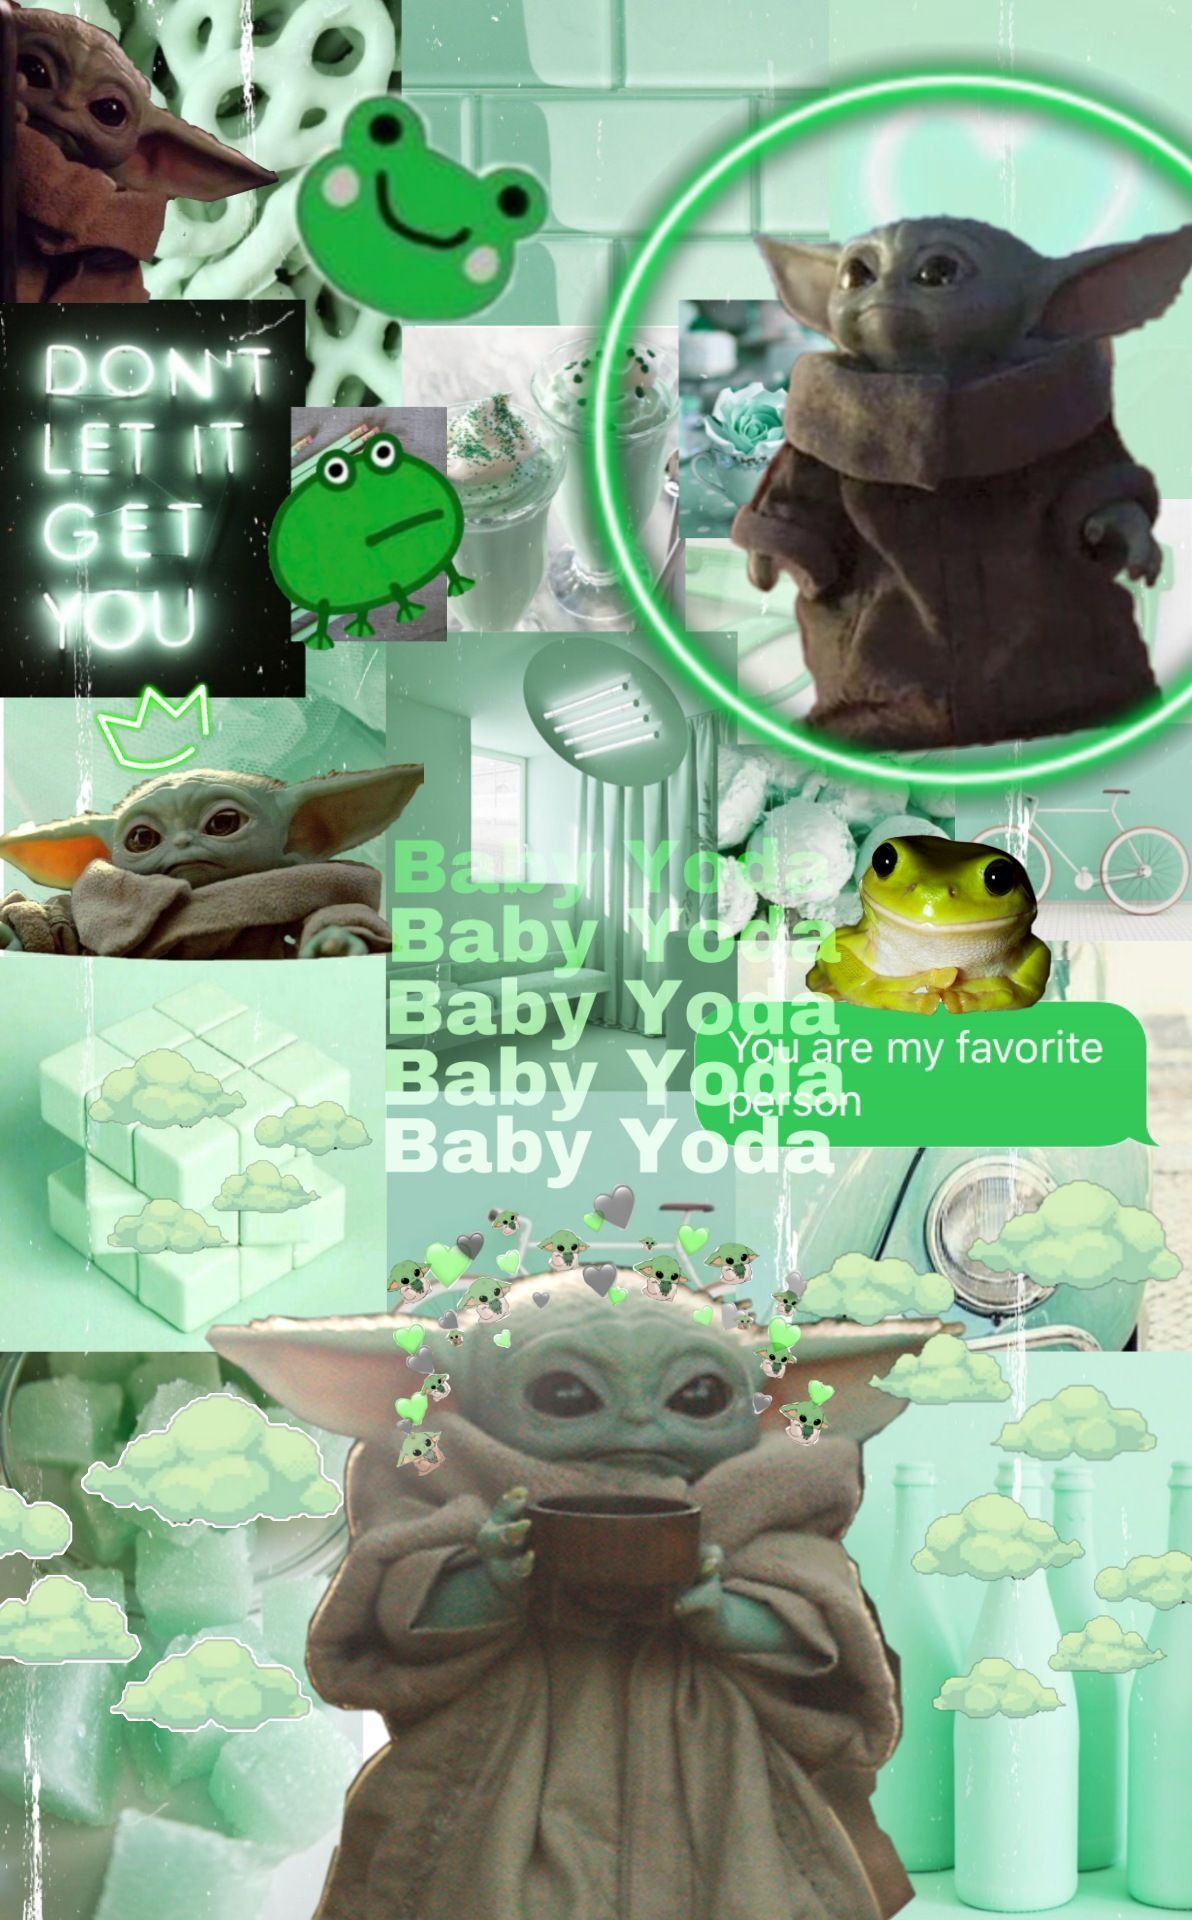 A collage of Baby Yoda images with a green aesthetic - Baby Yoda